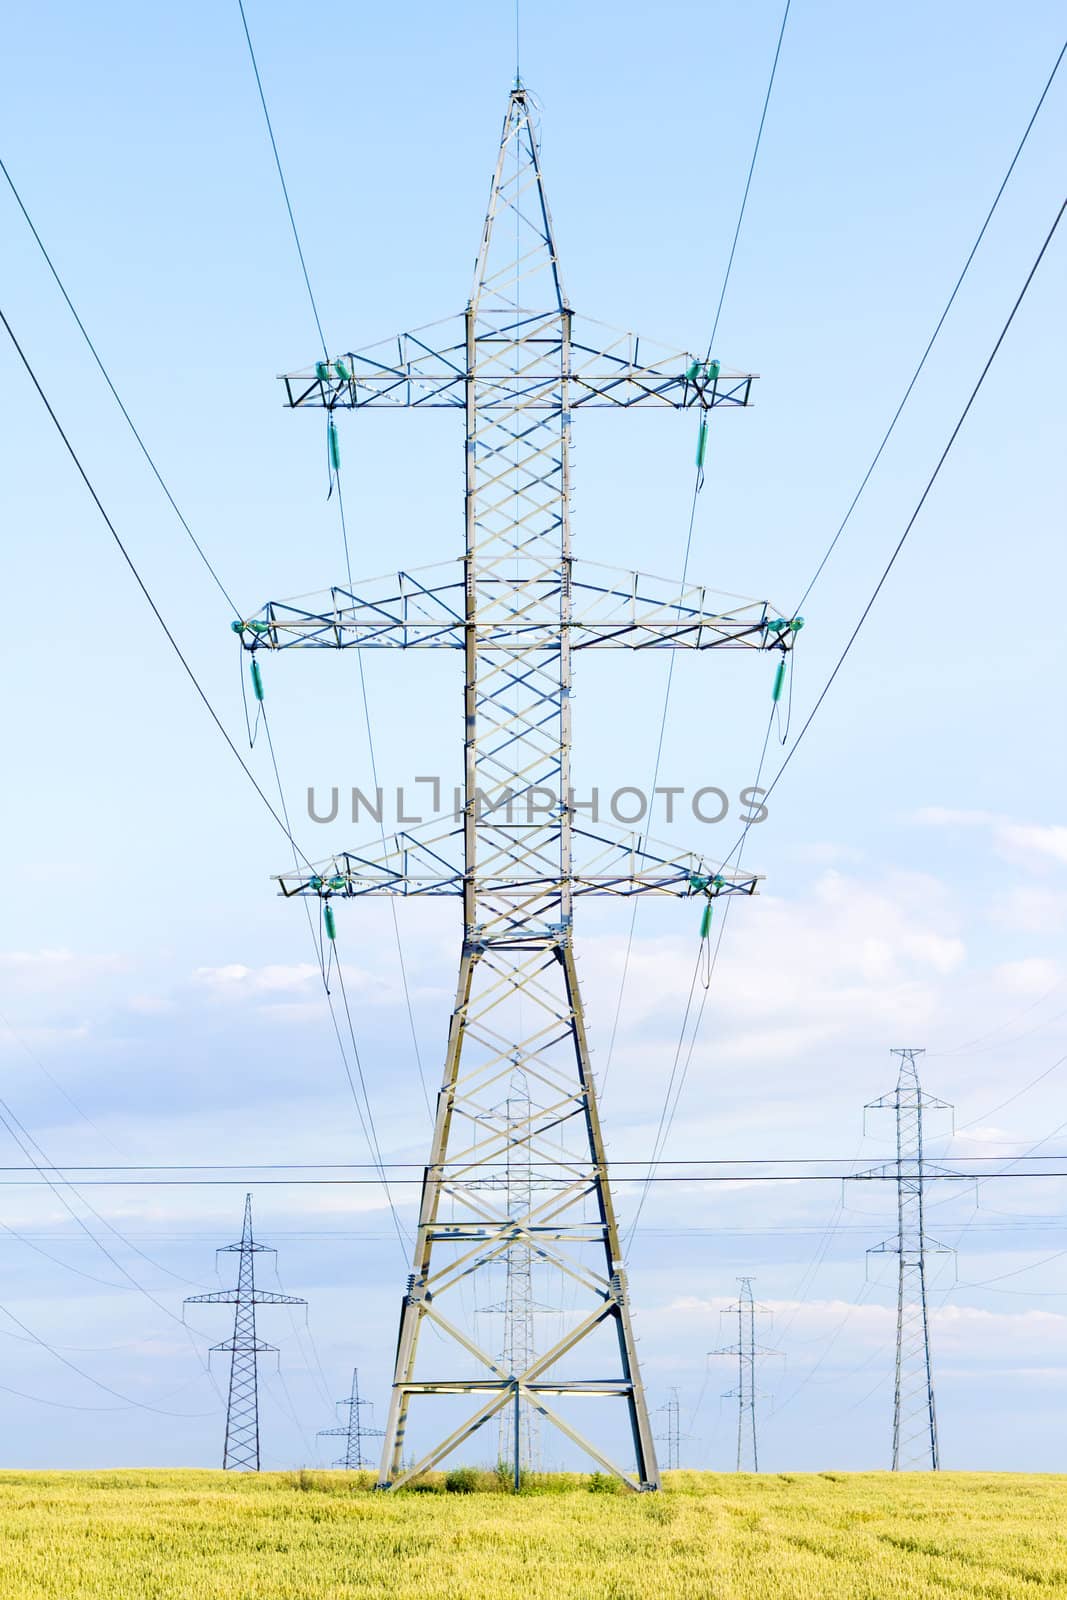 several transmission lines in the middle of a wheat field
